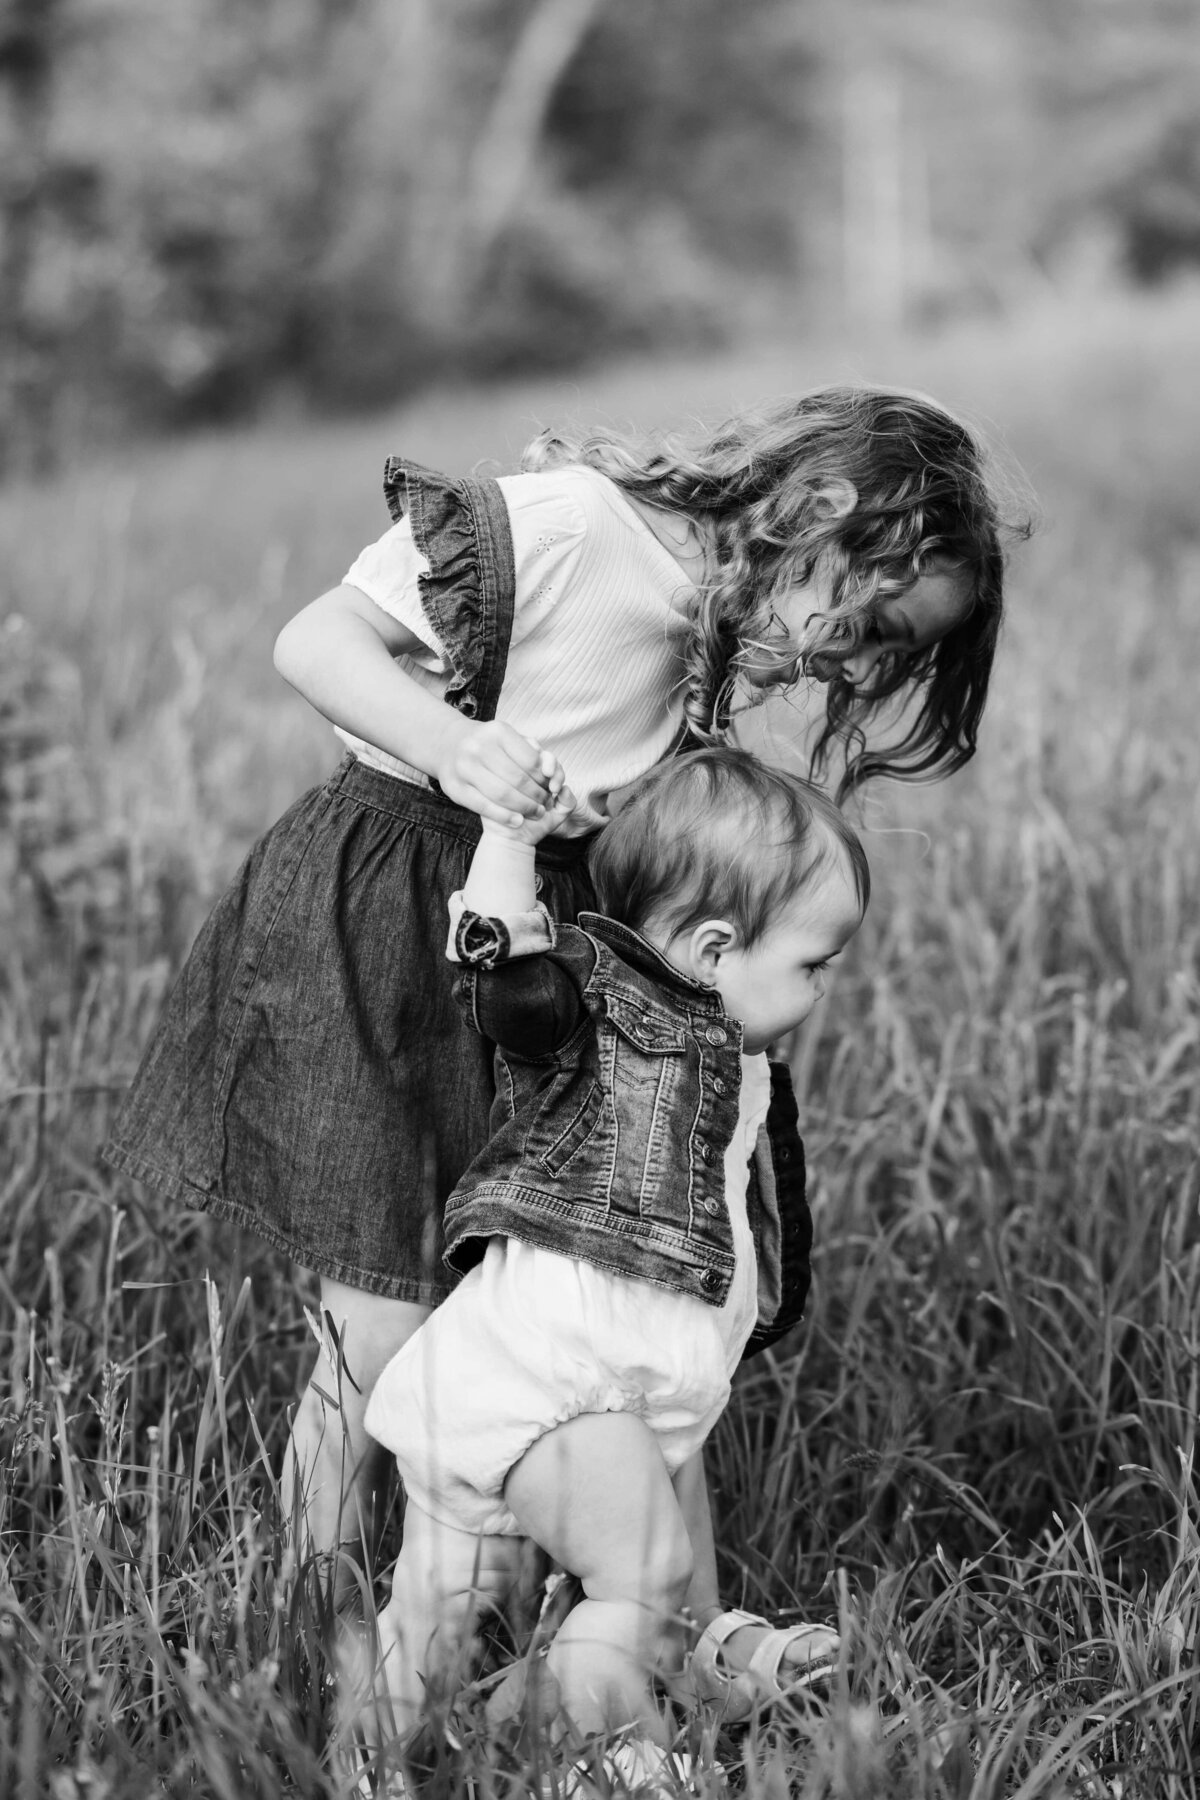 A young girl assists a toddler with walking in a grassy field, both are dressed in denim attire. This moment captured by a skilled Pittsburgh, PA photographer showcases the beauty of family connections.